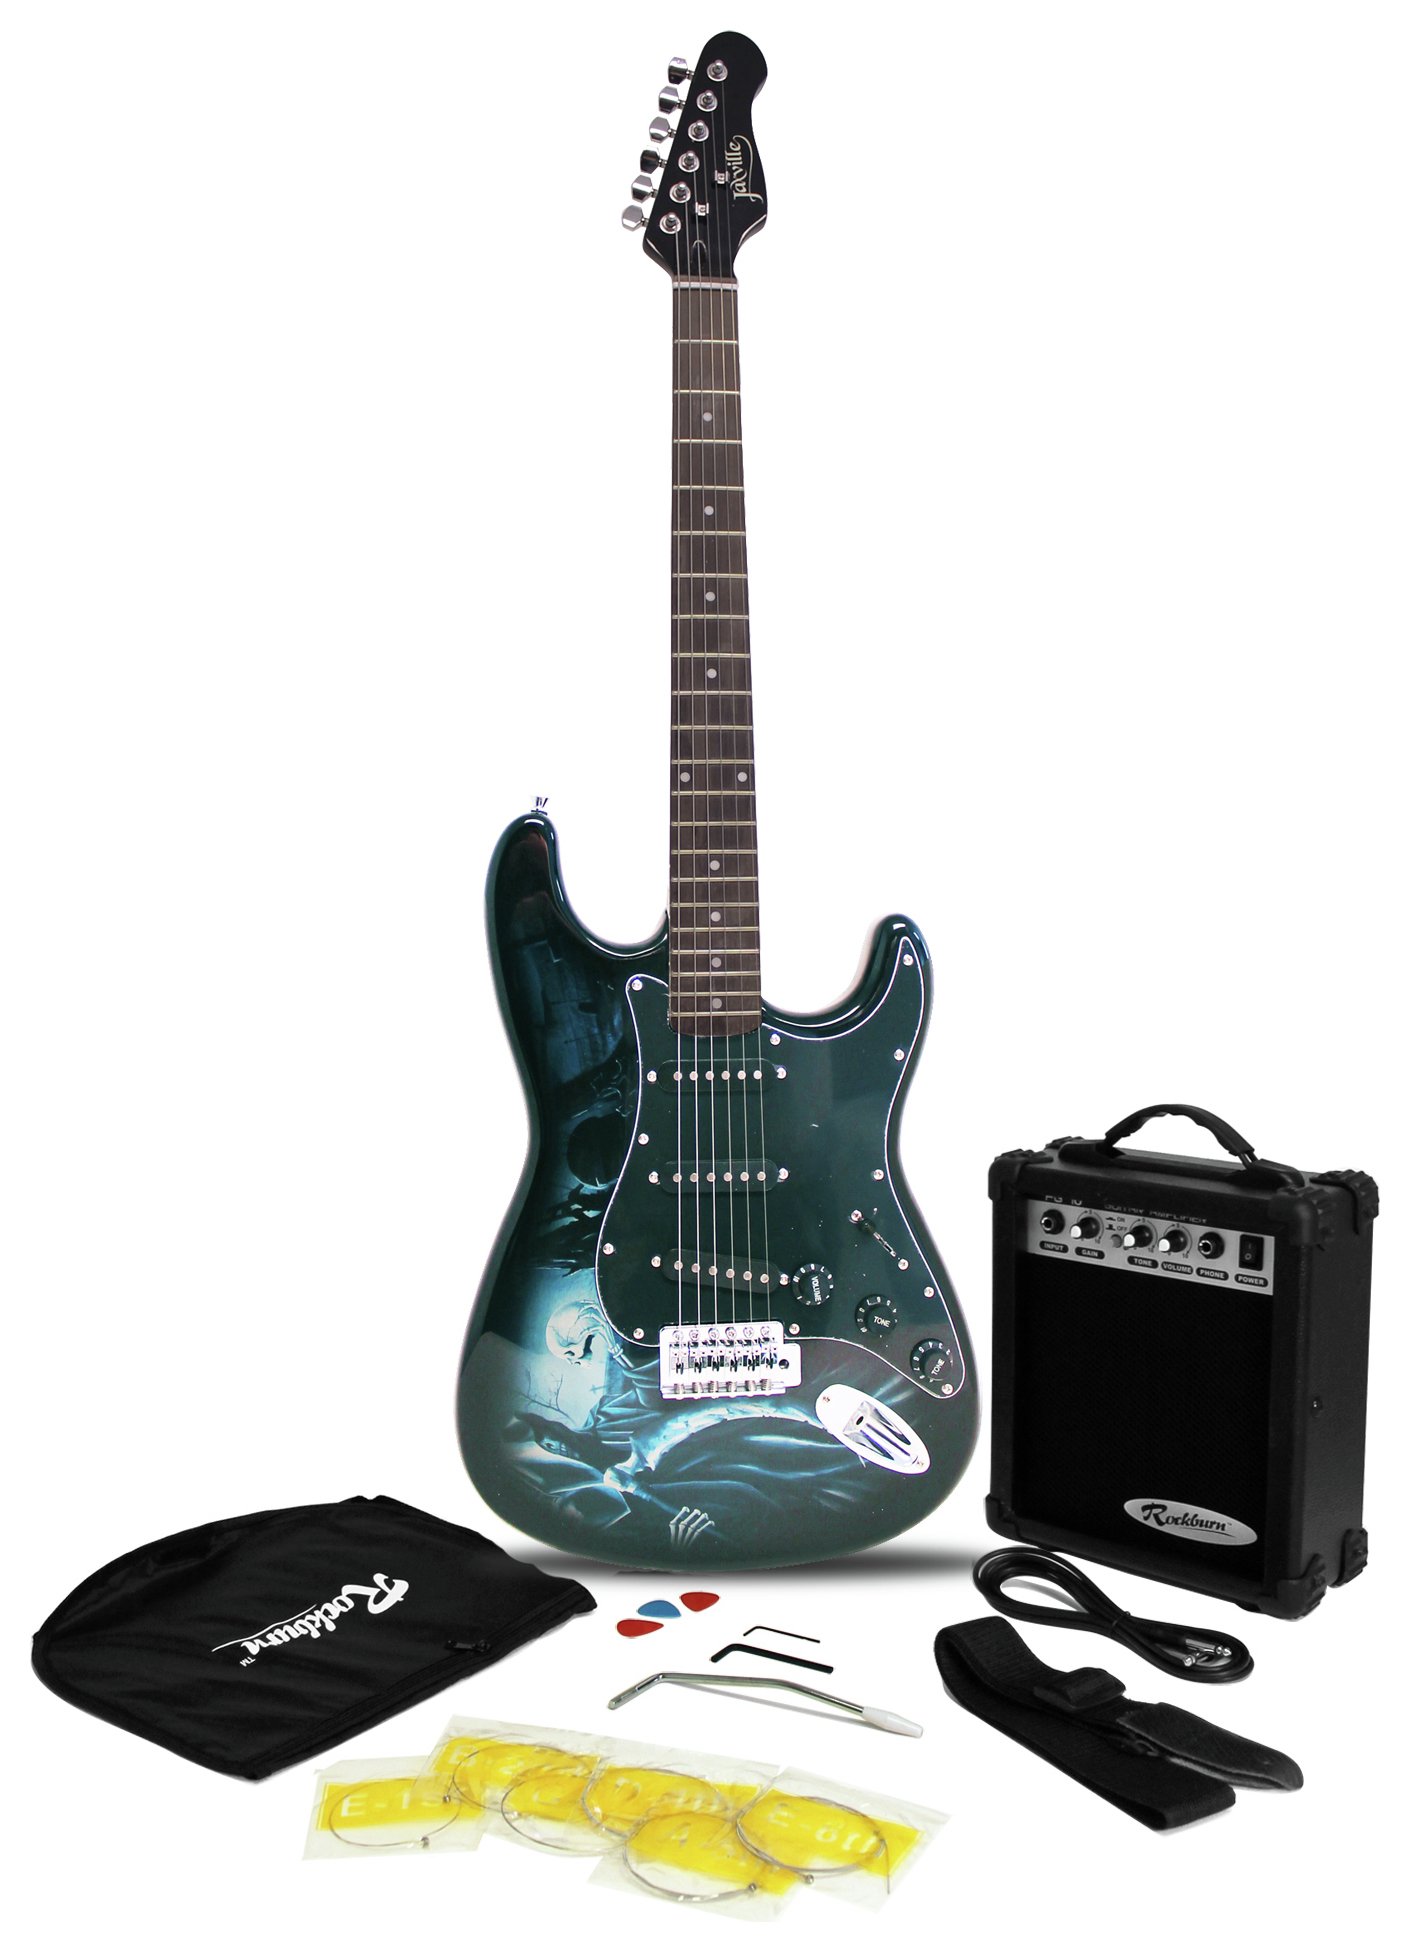 Jaxville Electric Guitar Pack - Hades Review